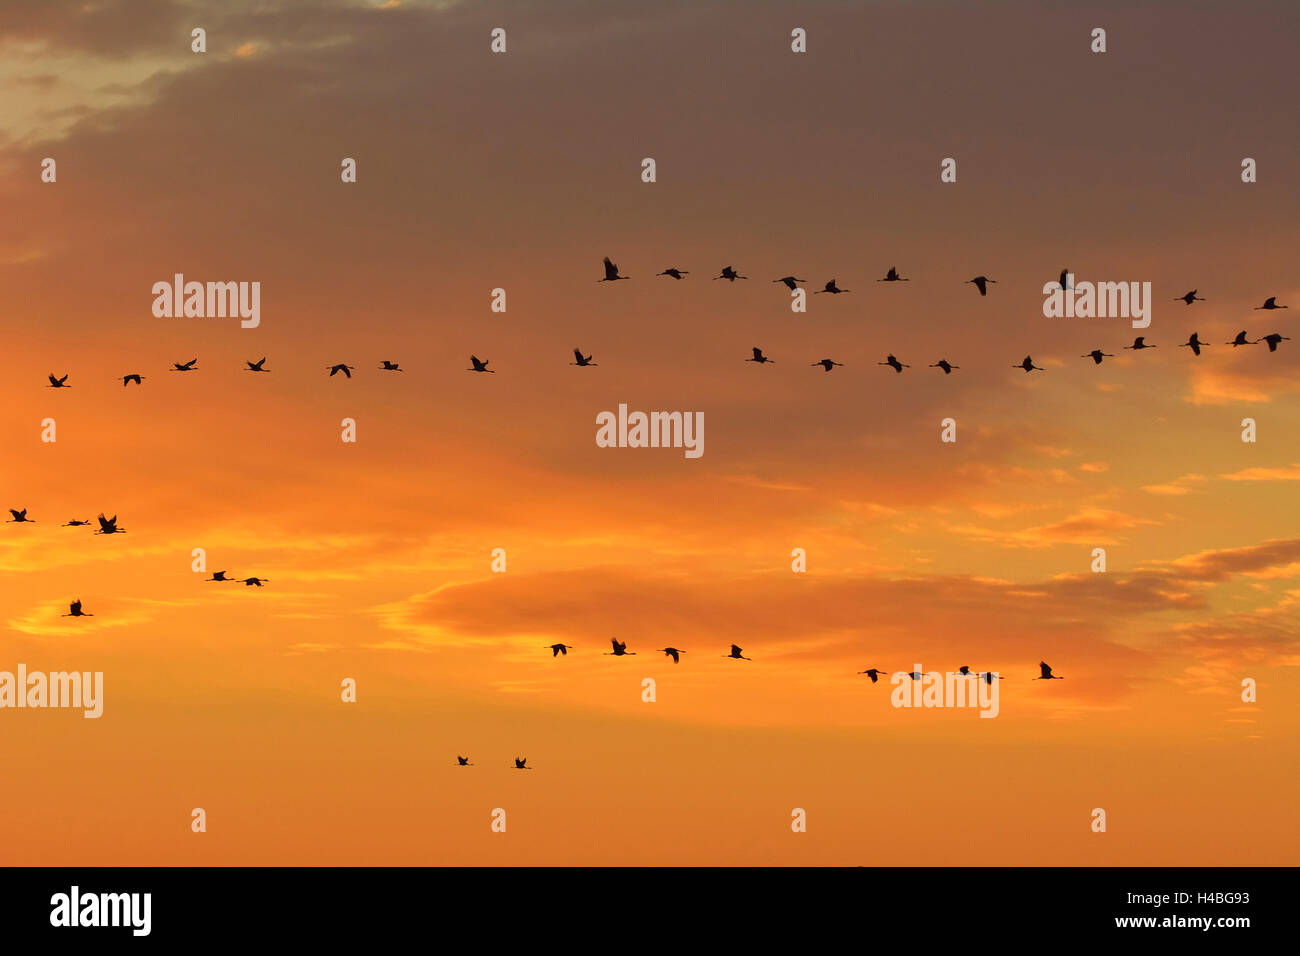 Common Cranes, Grus grus, in Formation Flight, at Sunrise, Zingst, Barther Bodden, Darss, Fischland-Darss-Zingst, Western Pomerania, Germany, Europe Stock Photo